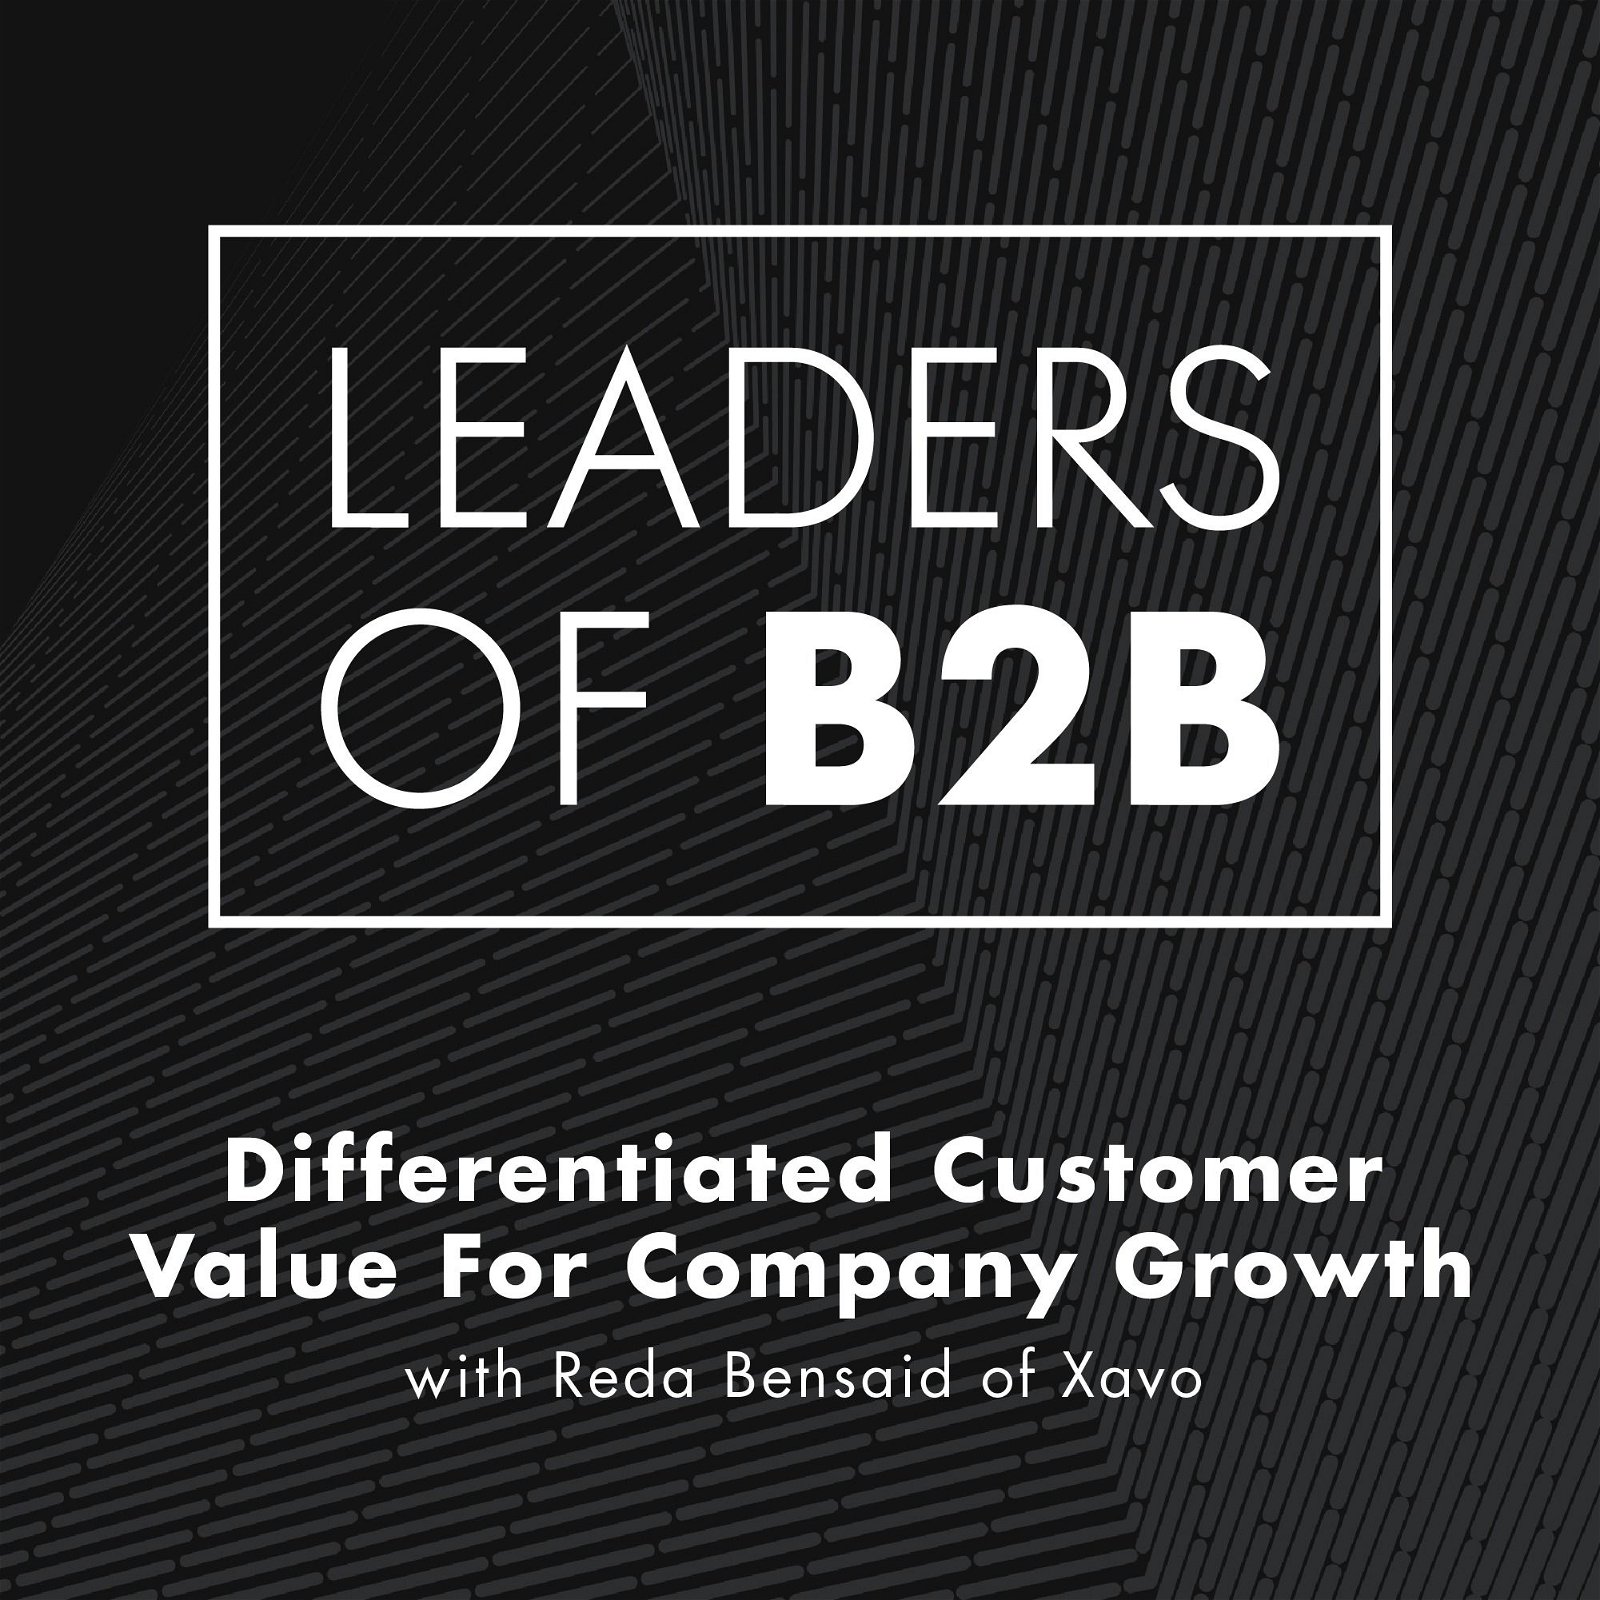 Differentiated Customer Value For Company Growth with Reda Bensaid of Xavo